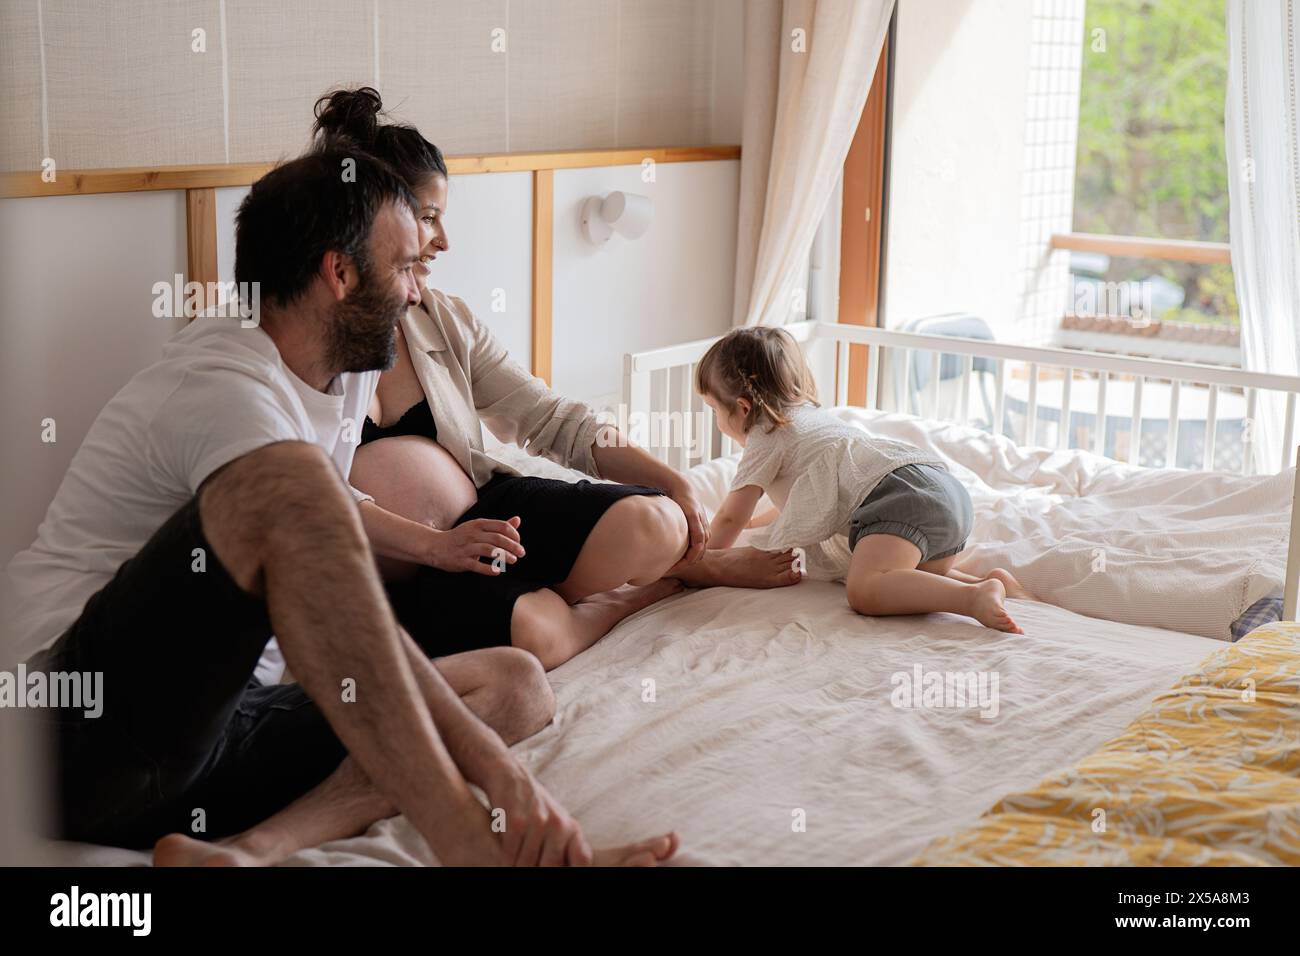 A heartwarming scene of a family with a toddler climbing on a bed near her pregnant mother and father, enjoying a relaxed moment together Stock Photo